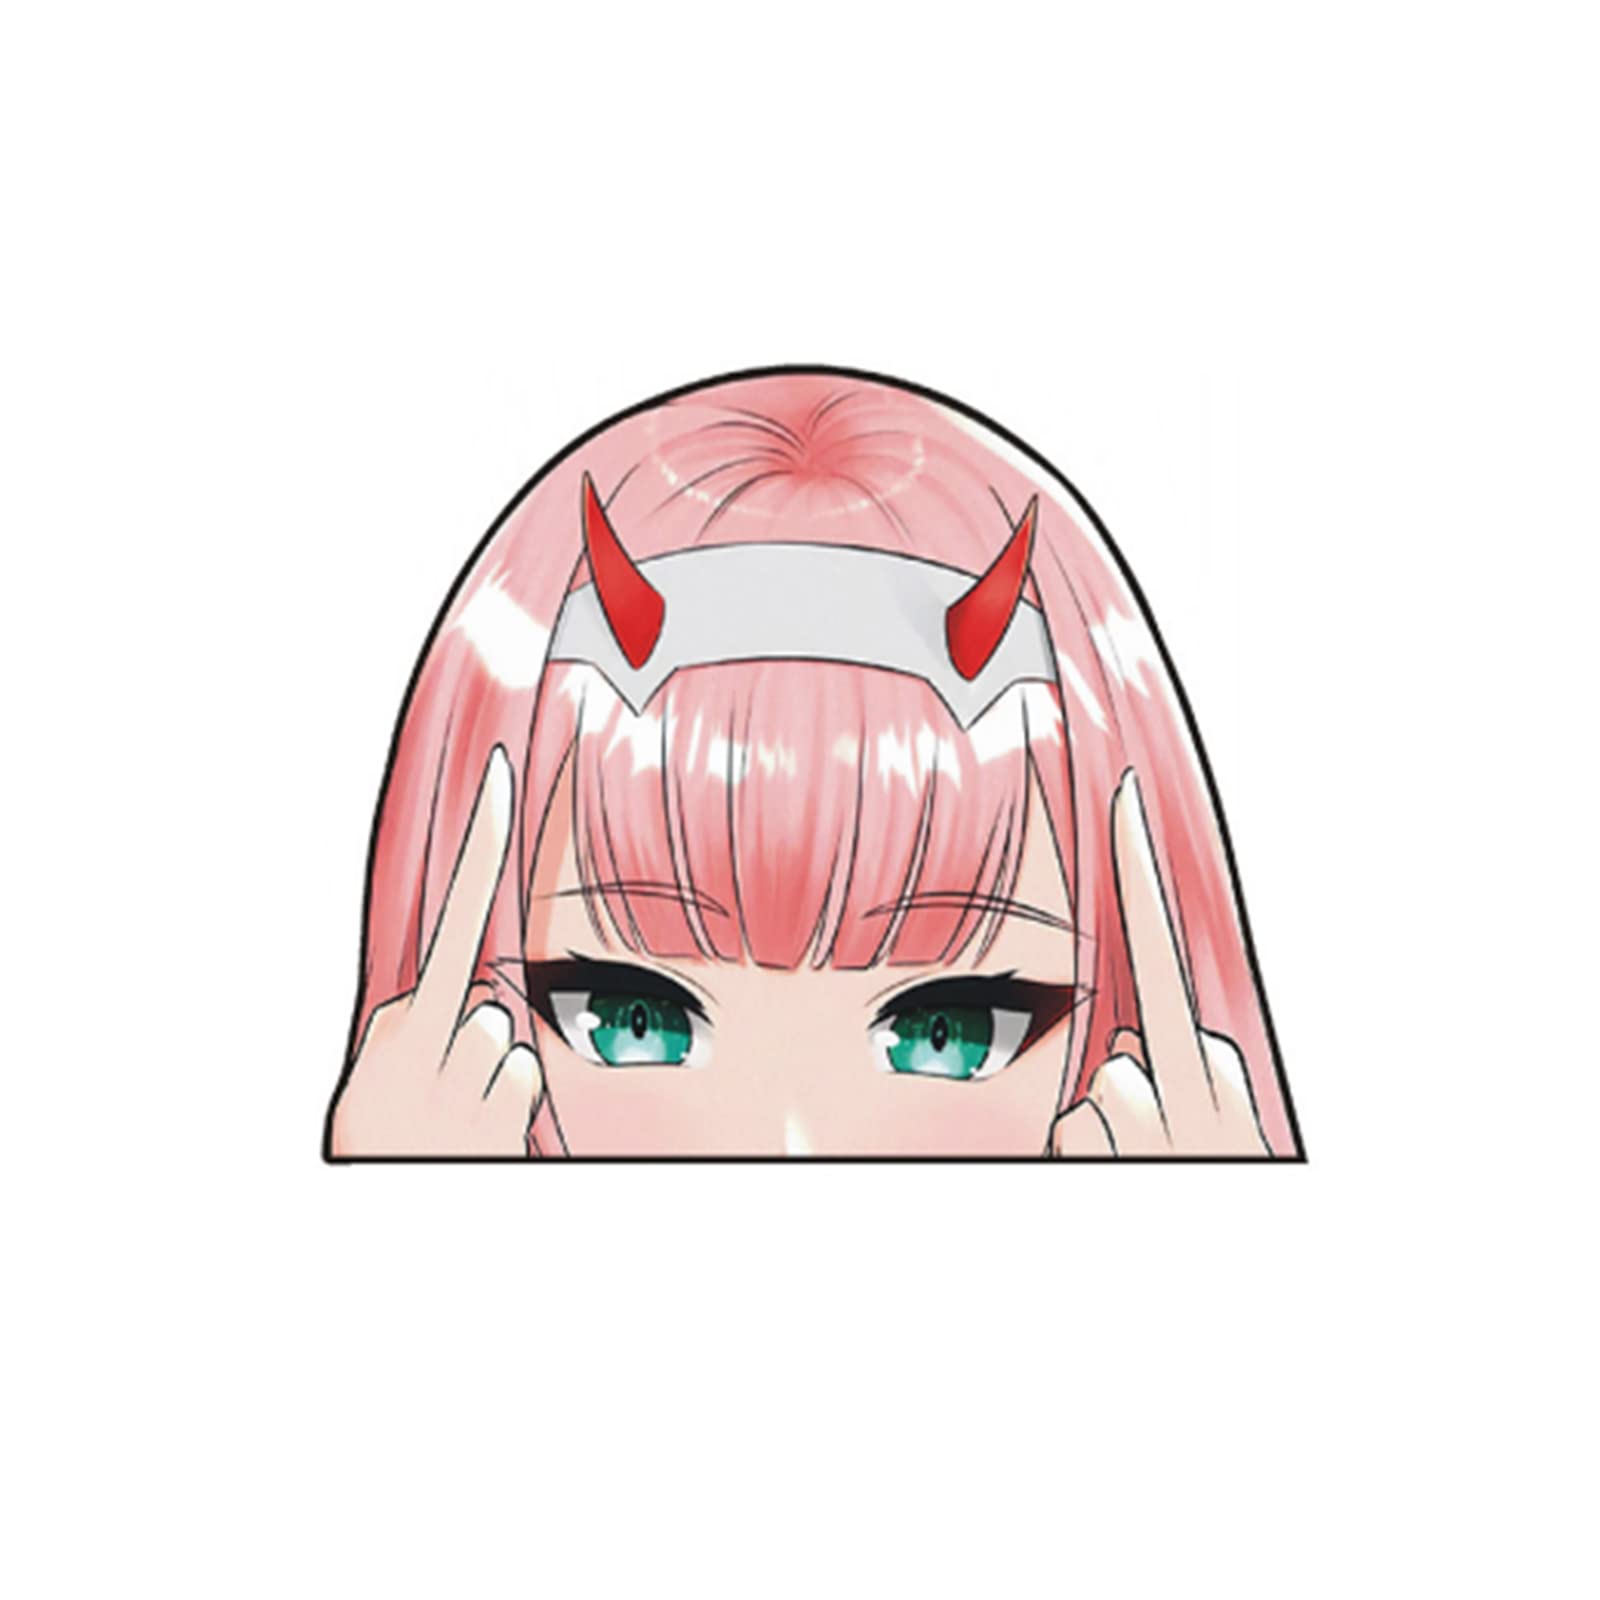 Create an anime peeker sticker vector for your shop by Frs_23 | Fiverr